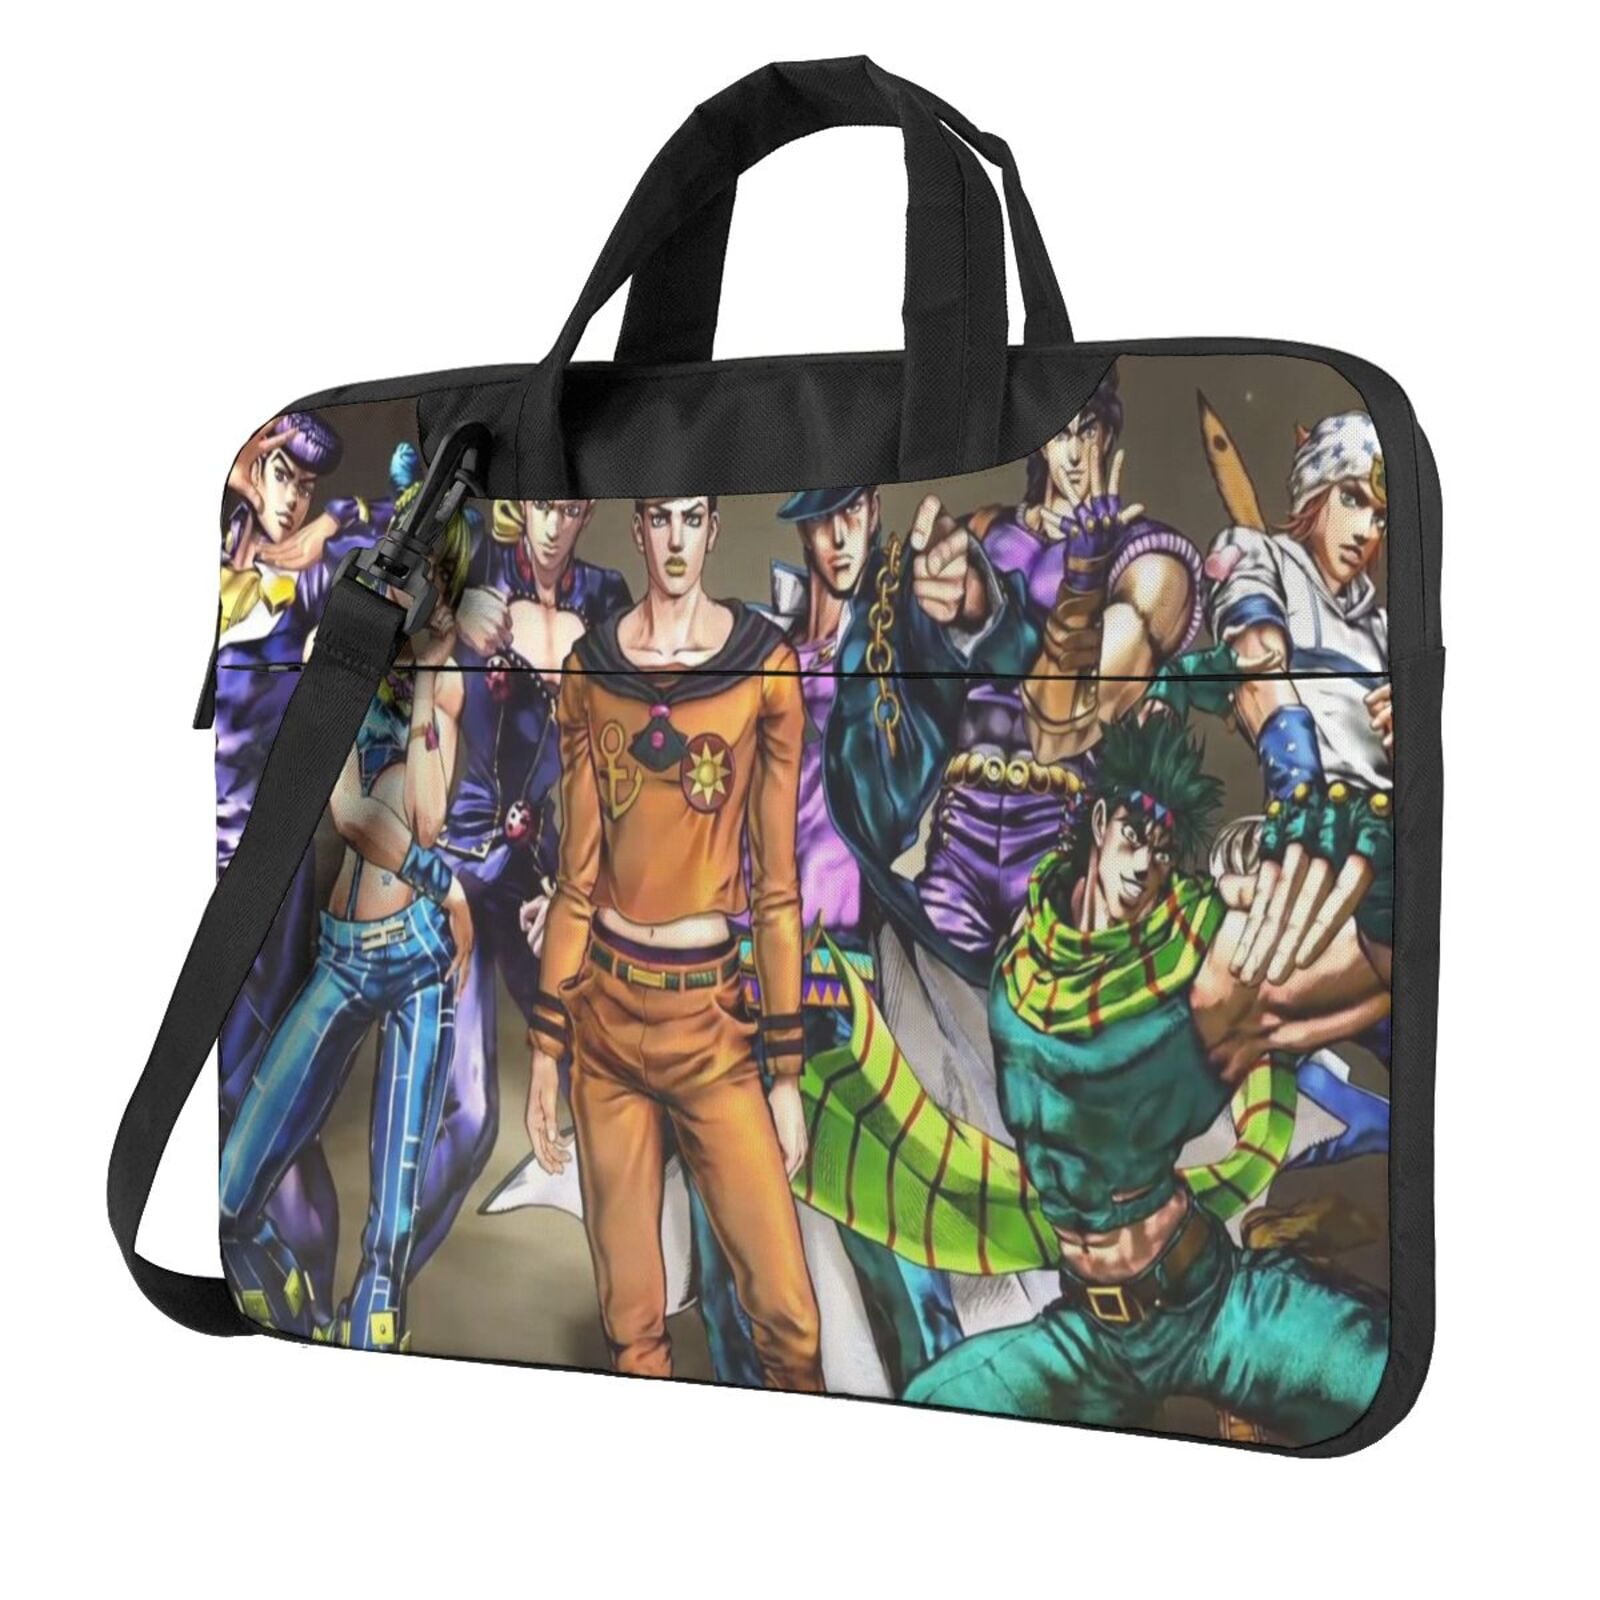 JoJos Bizarre Adventure Backpack Fashion School Laptop Bag Water-Repellent Casual Daypack for Travel/Business/College 